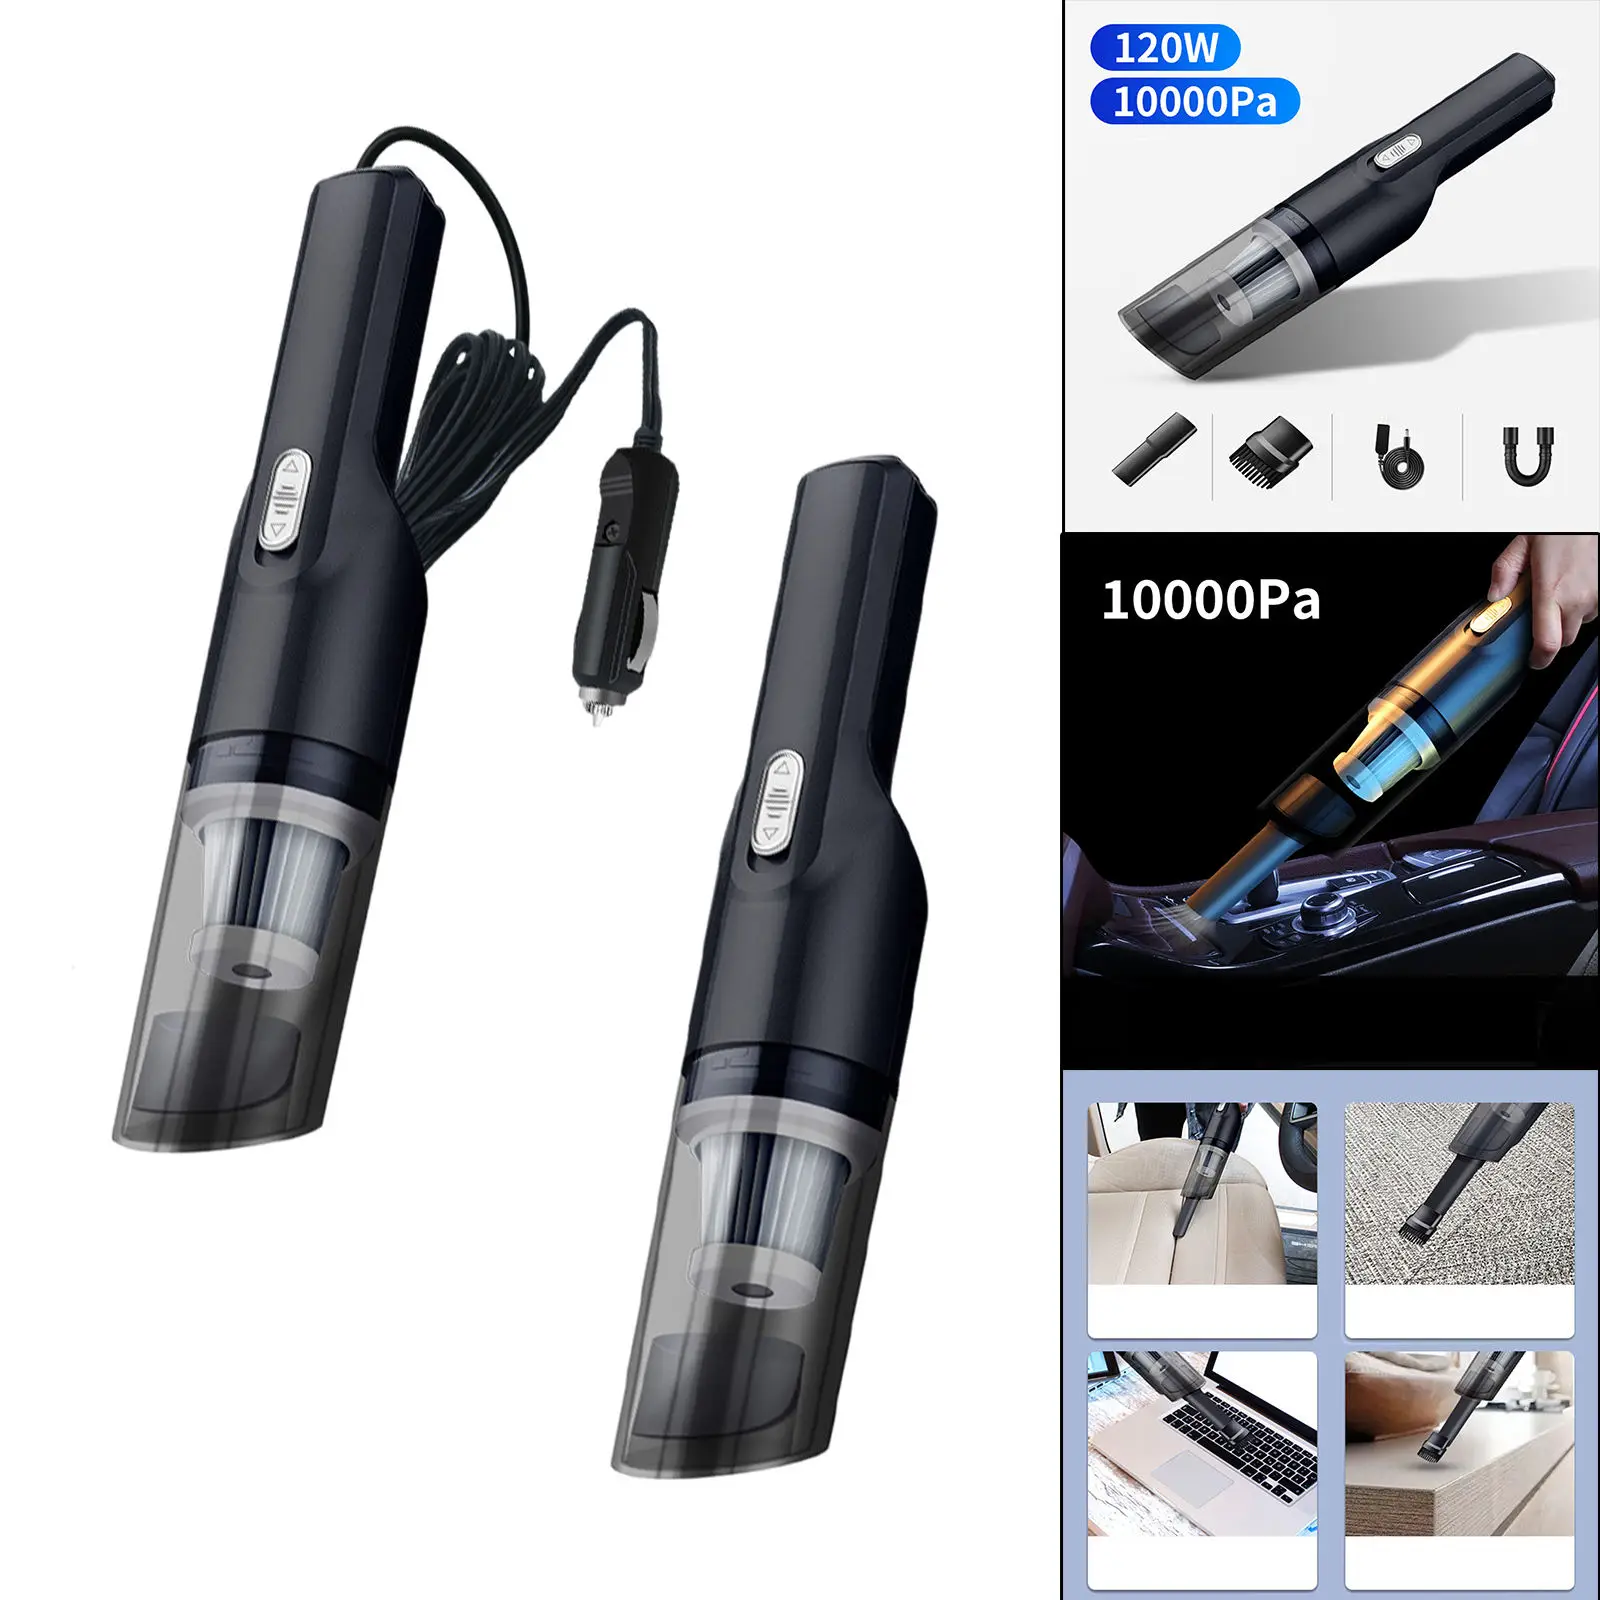 10000Pa Wireless / Wired Powerful Car Vacuum Cleaner Portable Wet&Dry Handheld Suction Auto Car Interior Seat Cleaner Vacuum